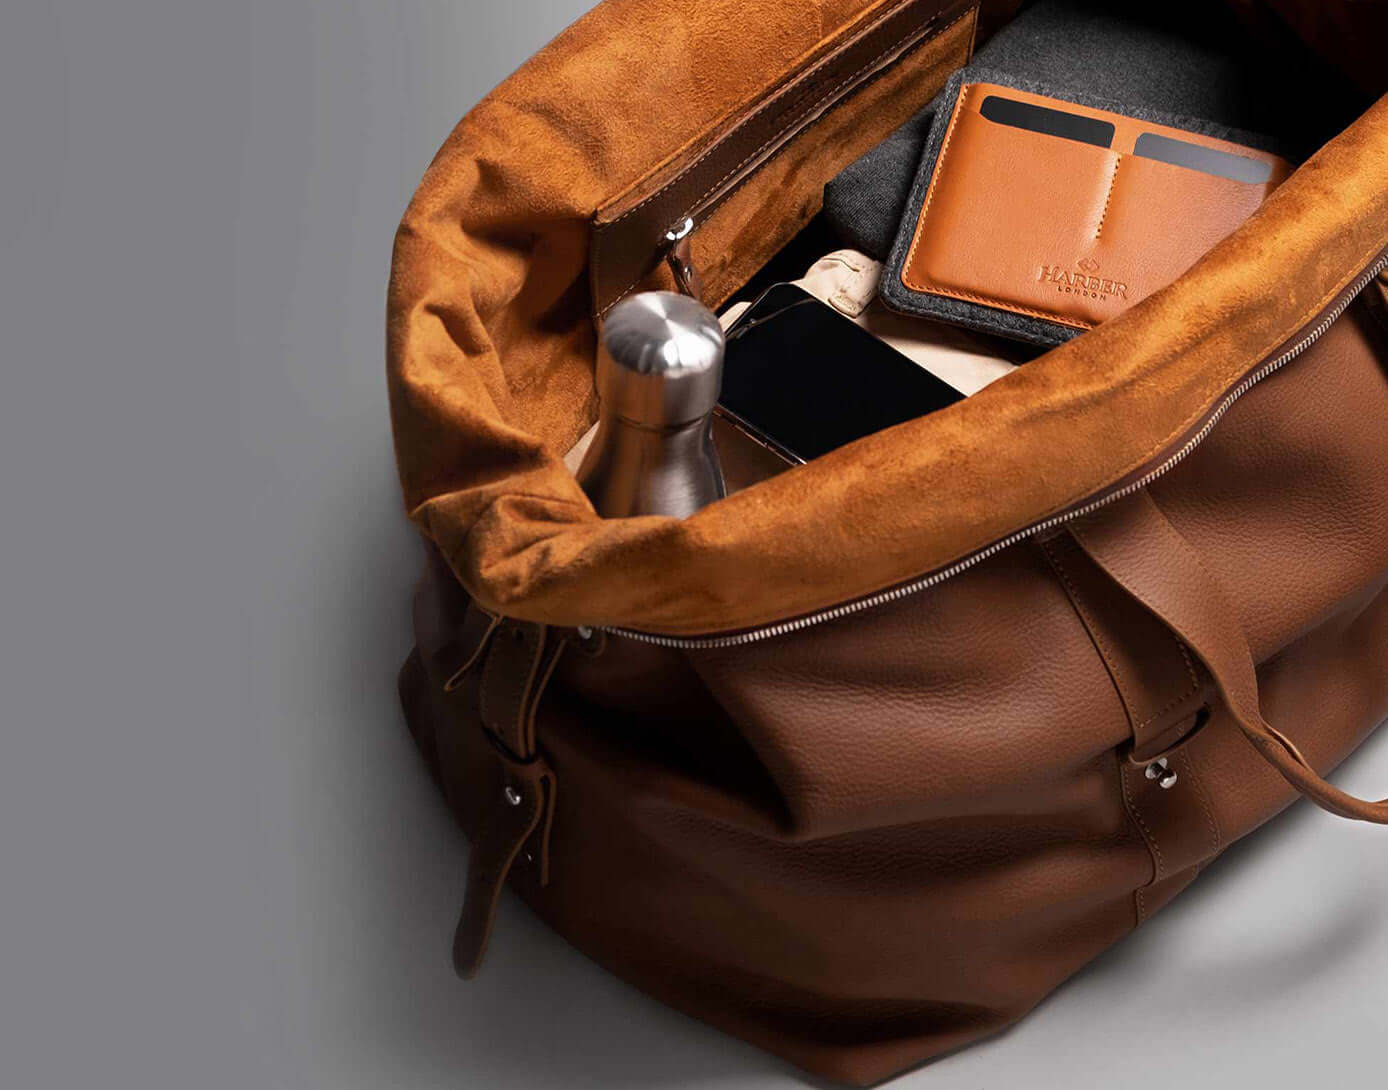 Luxury leather travel bags